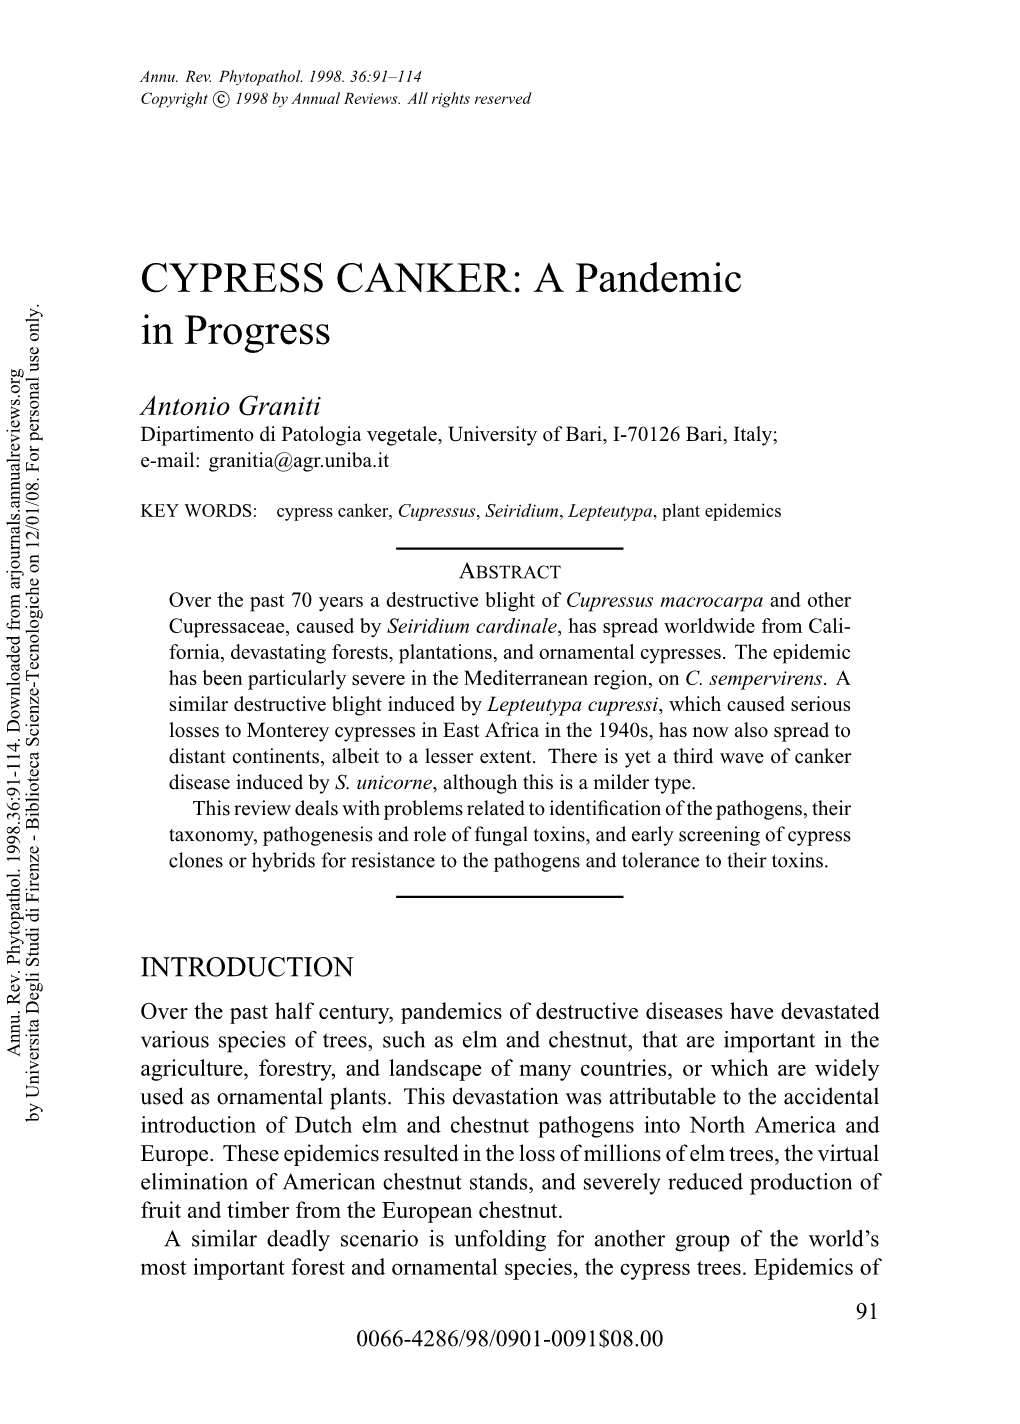 CYPRESS CANKER: a Pandemic in Progress